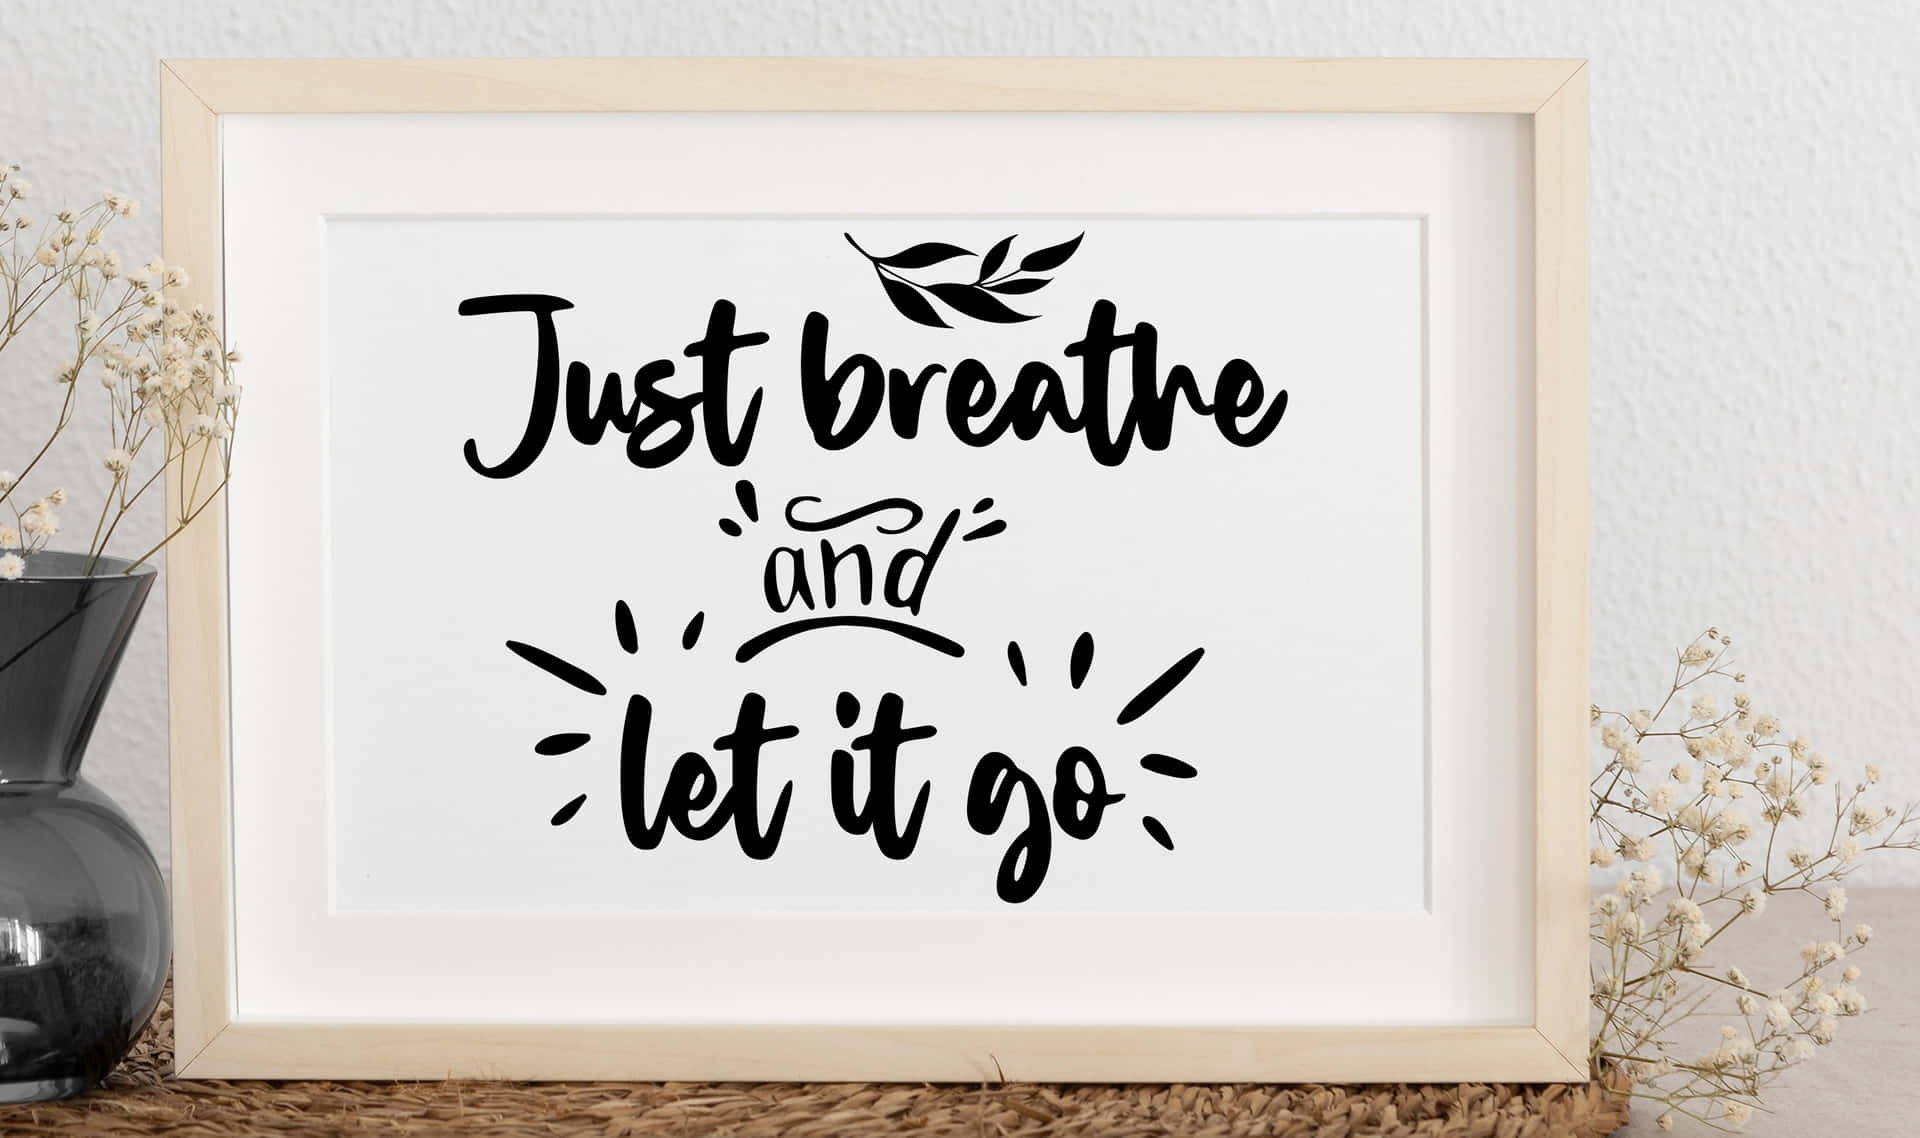 Embracing Tranquility With A Breathe & Let It Go Image